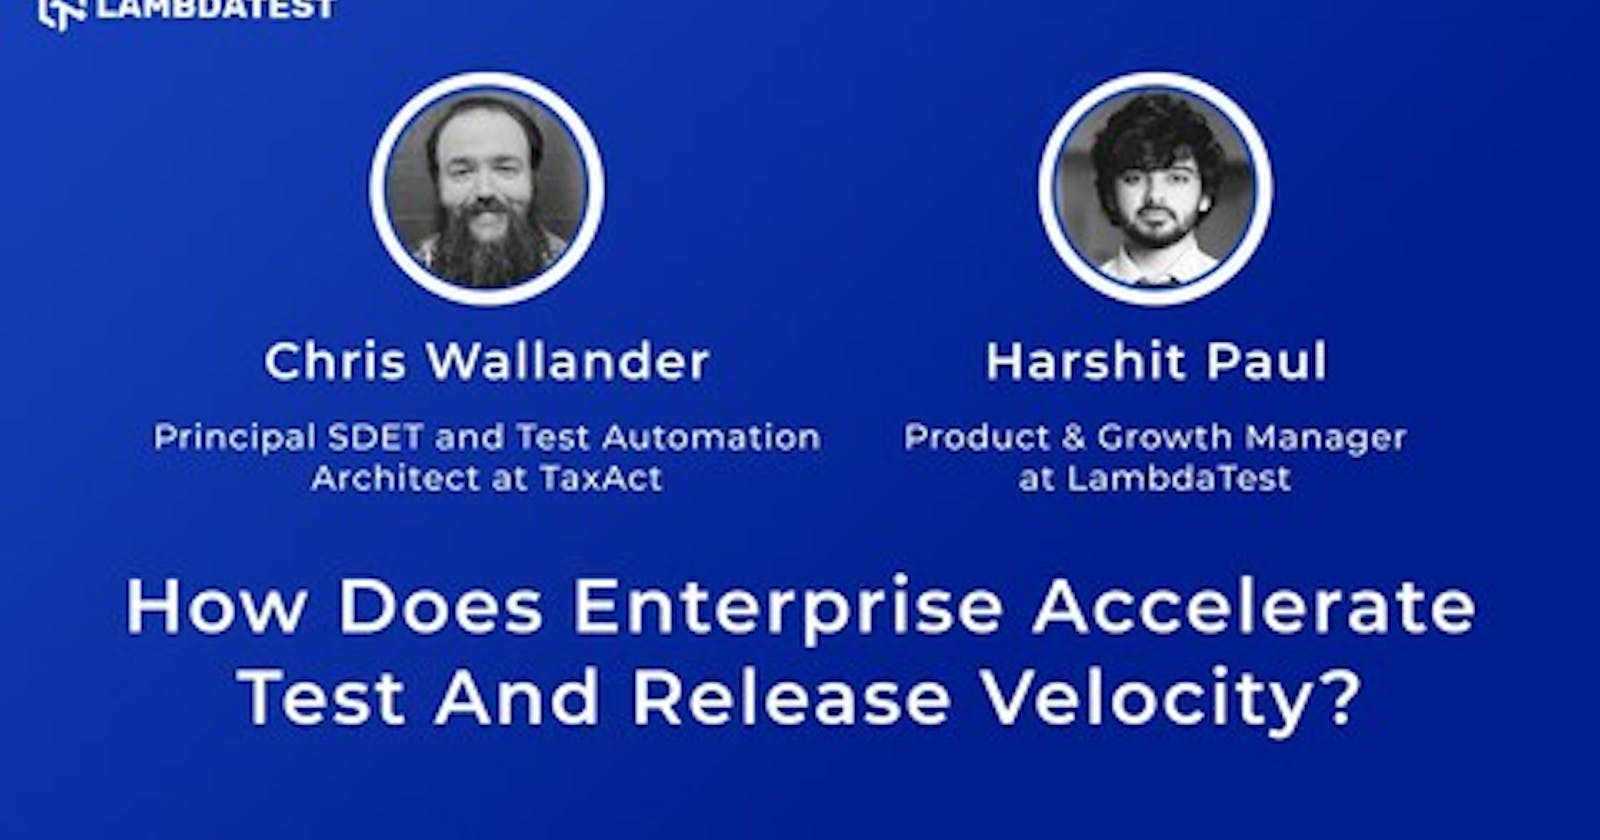 How Does Enterprise Accelerate Test And Release Velocity?